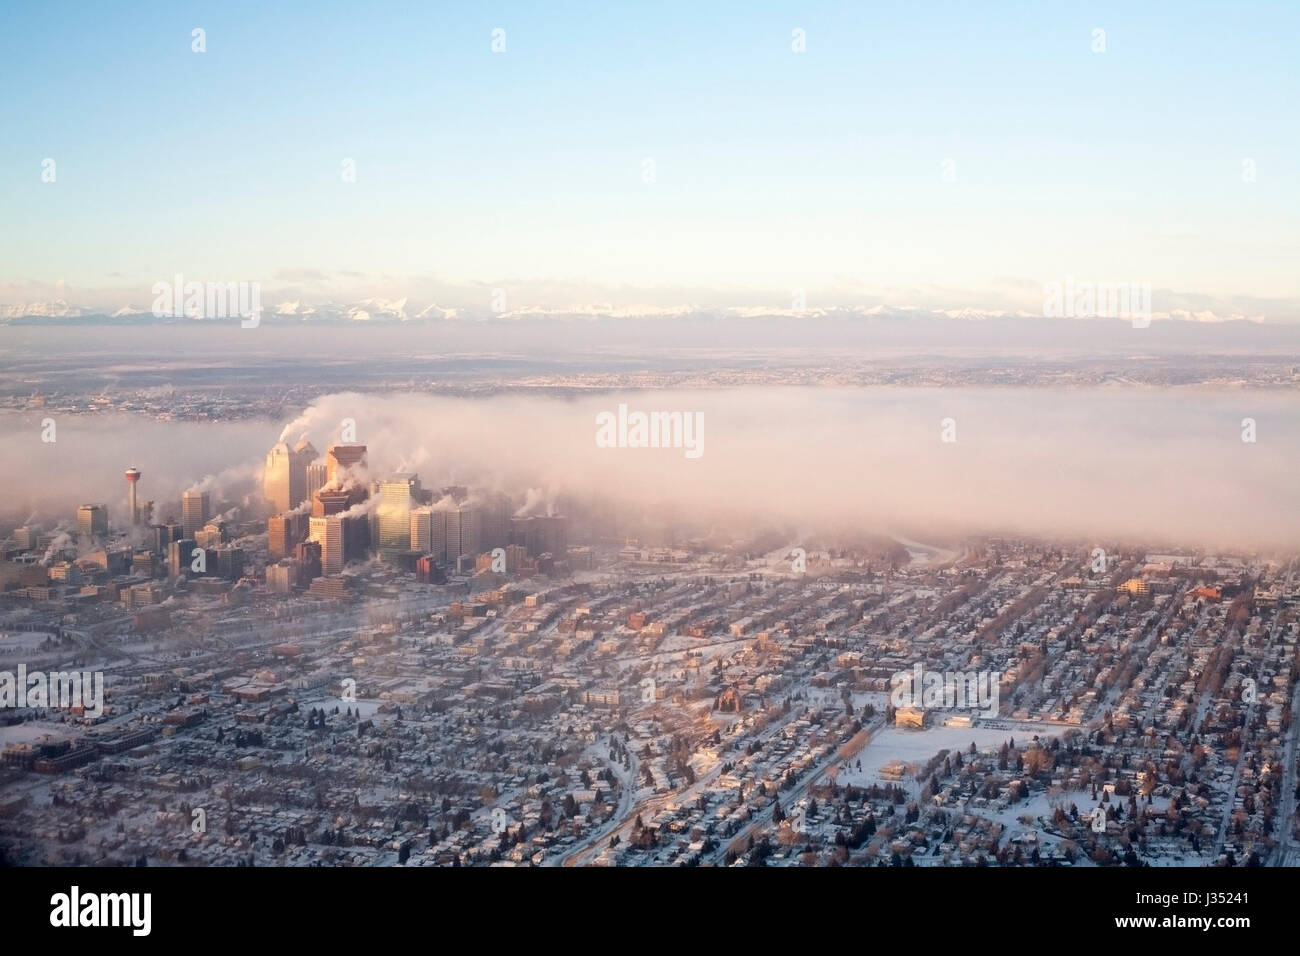 Plume of emissions from downtown buildings and air pollution over the city of Calgary during cold weather Stock Photo